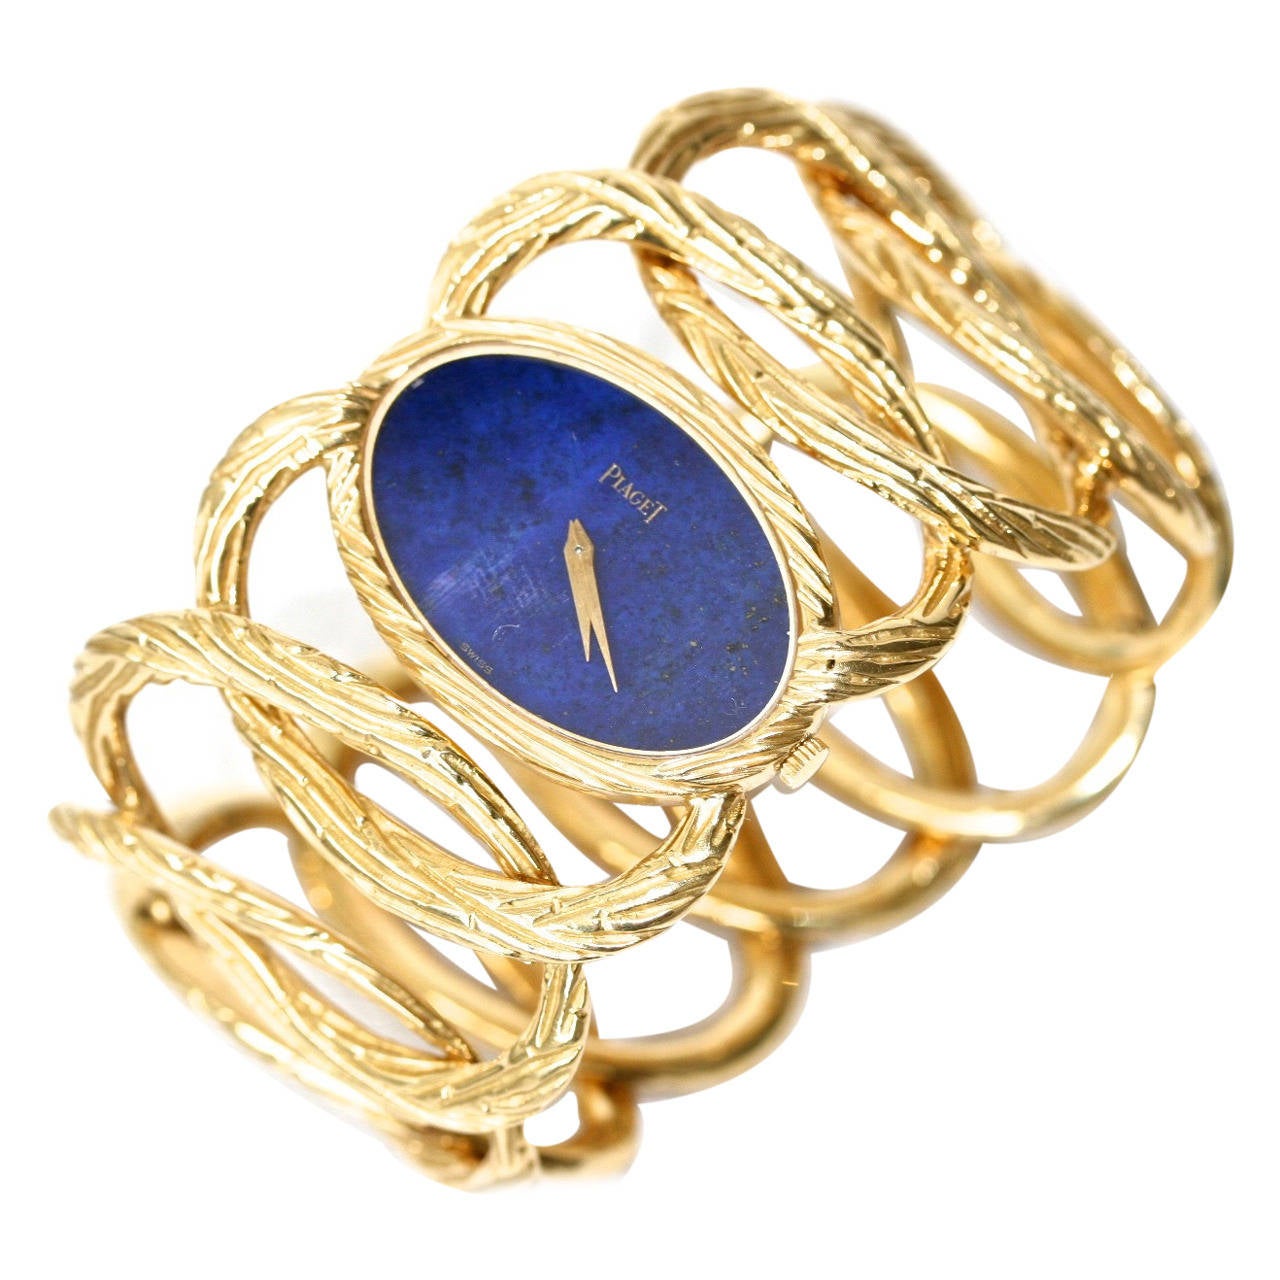 PIAGET 1970s Gold and Lapis Bracelet Watch